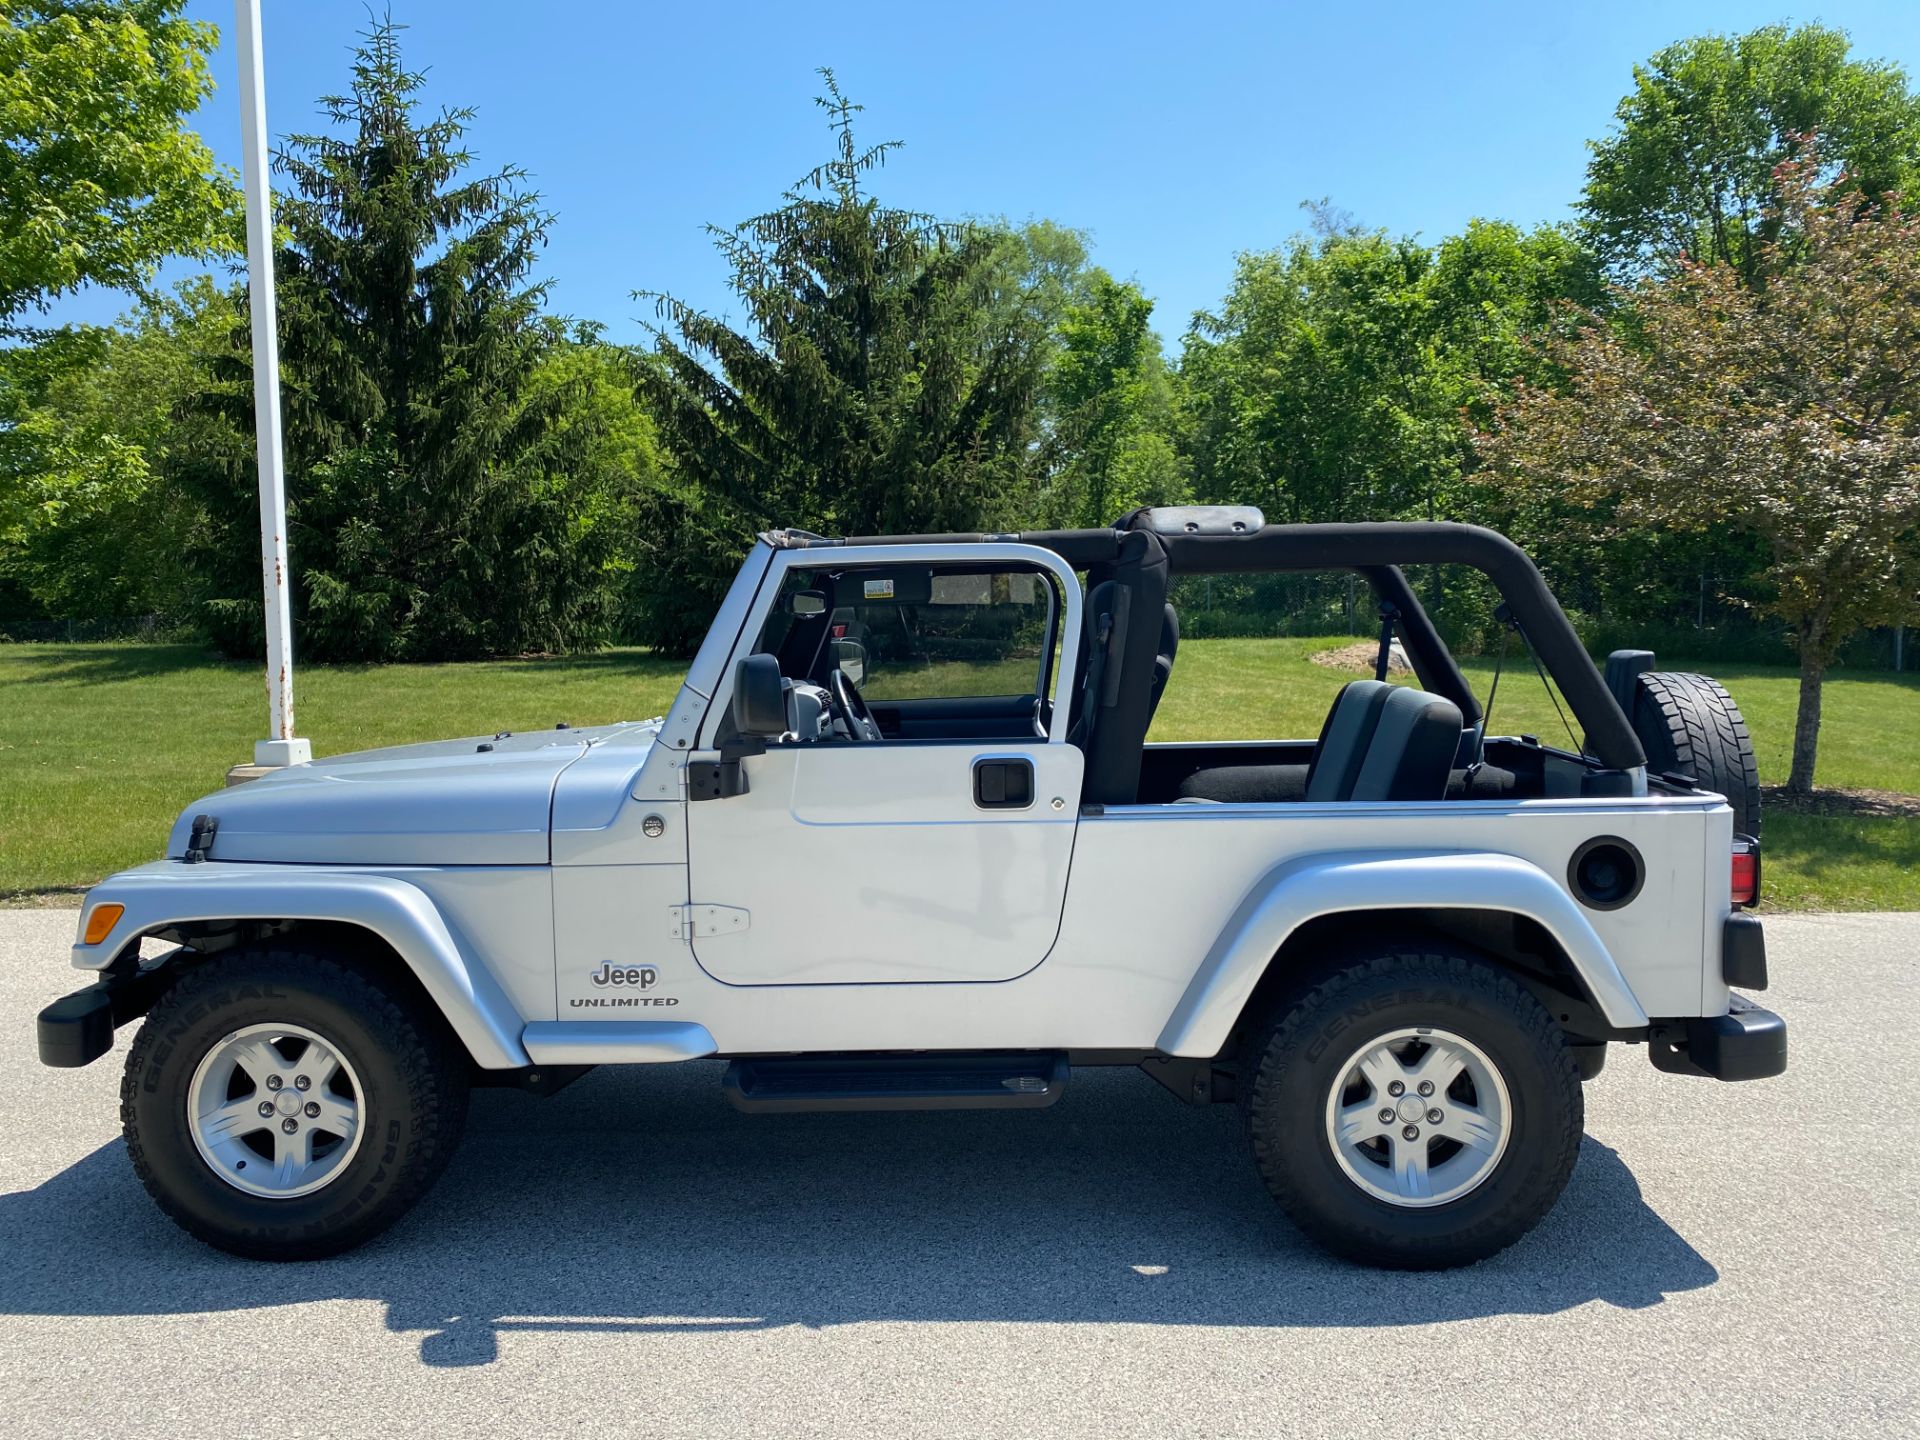 Used 2005 Jeep® Wrangler Unlimited | Automobile in Big Bend WI | 4388  Bright Silver Metallic